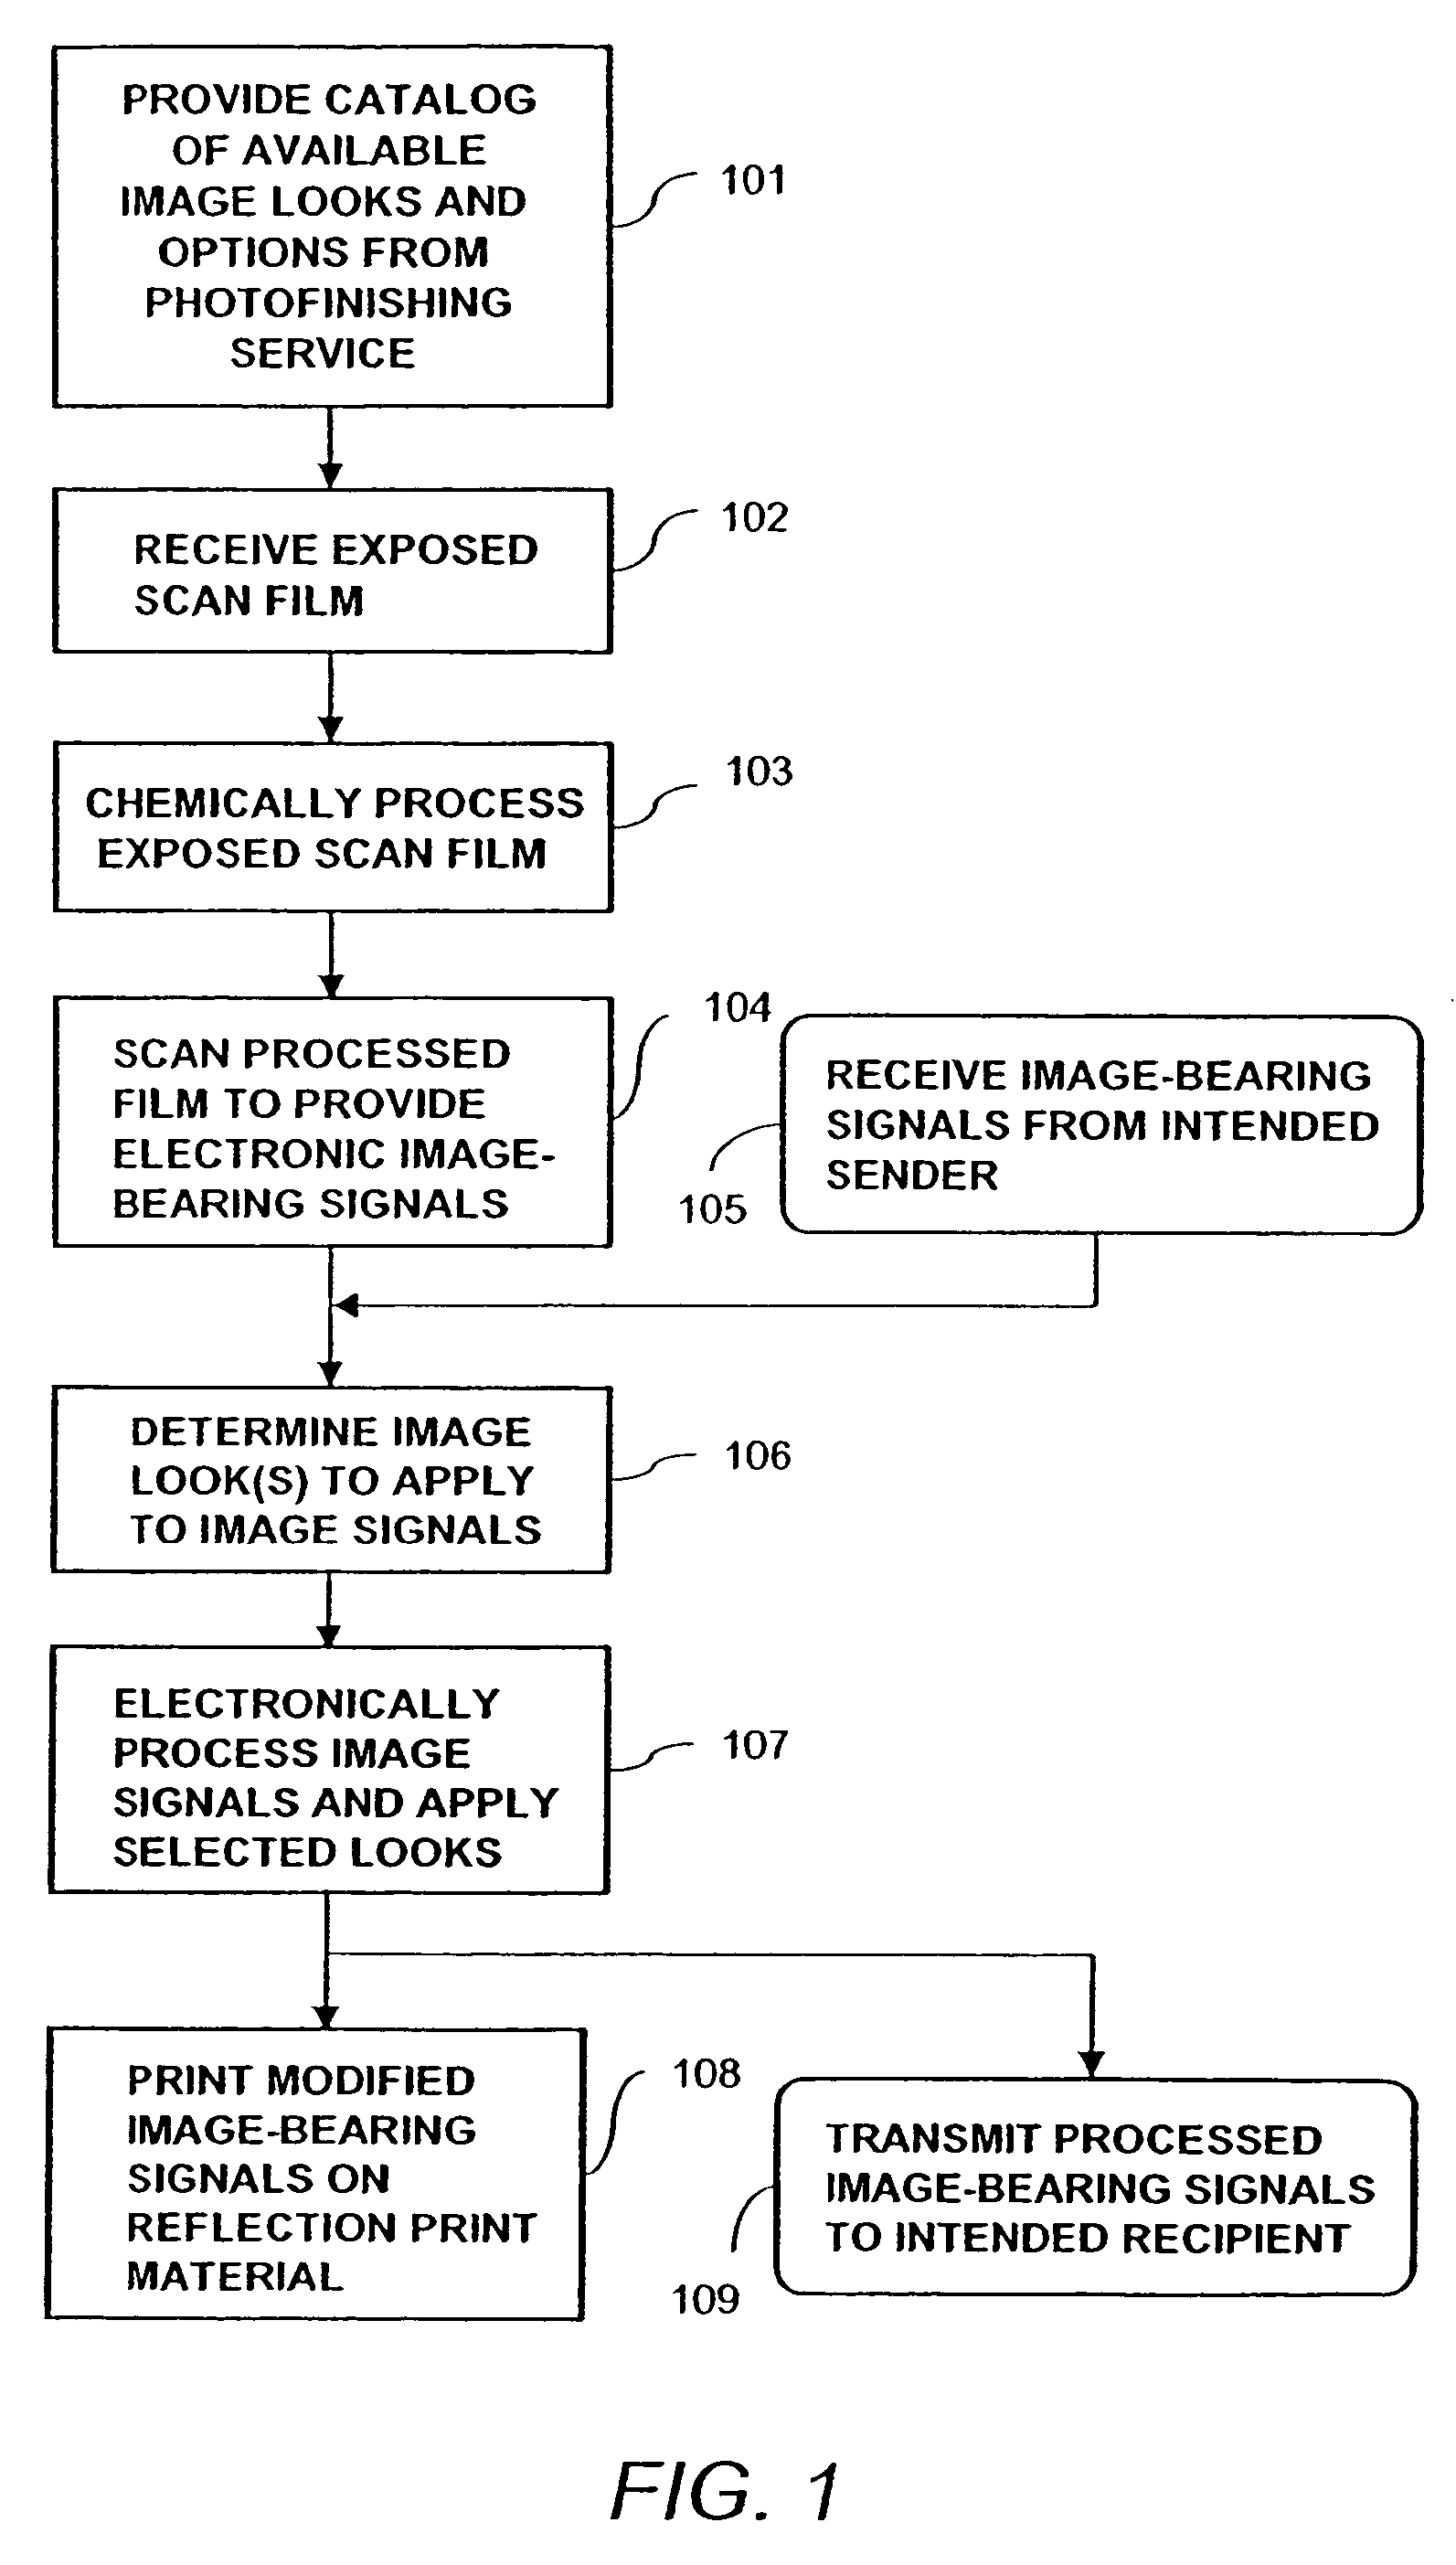 Plurality of picture appearance choices from a color photographic recording material intended for scanning